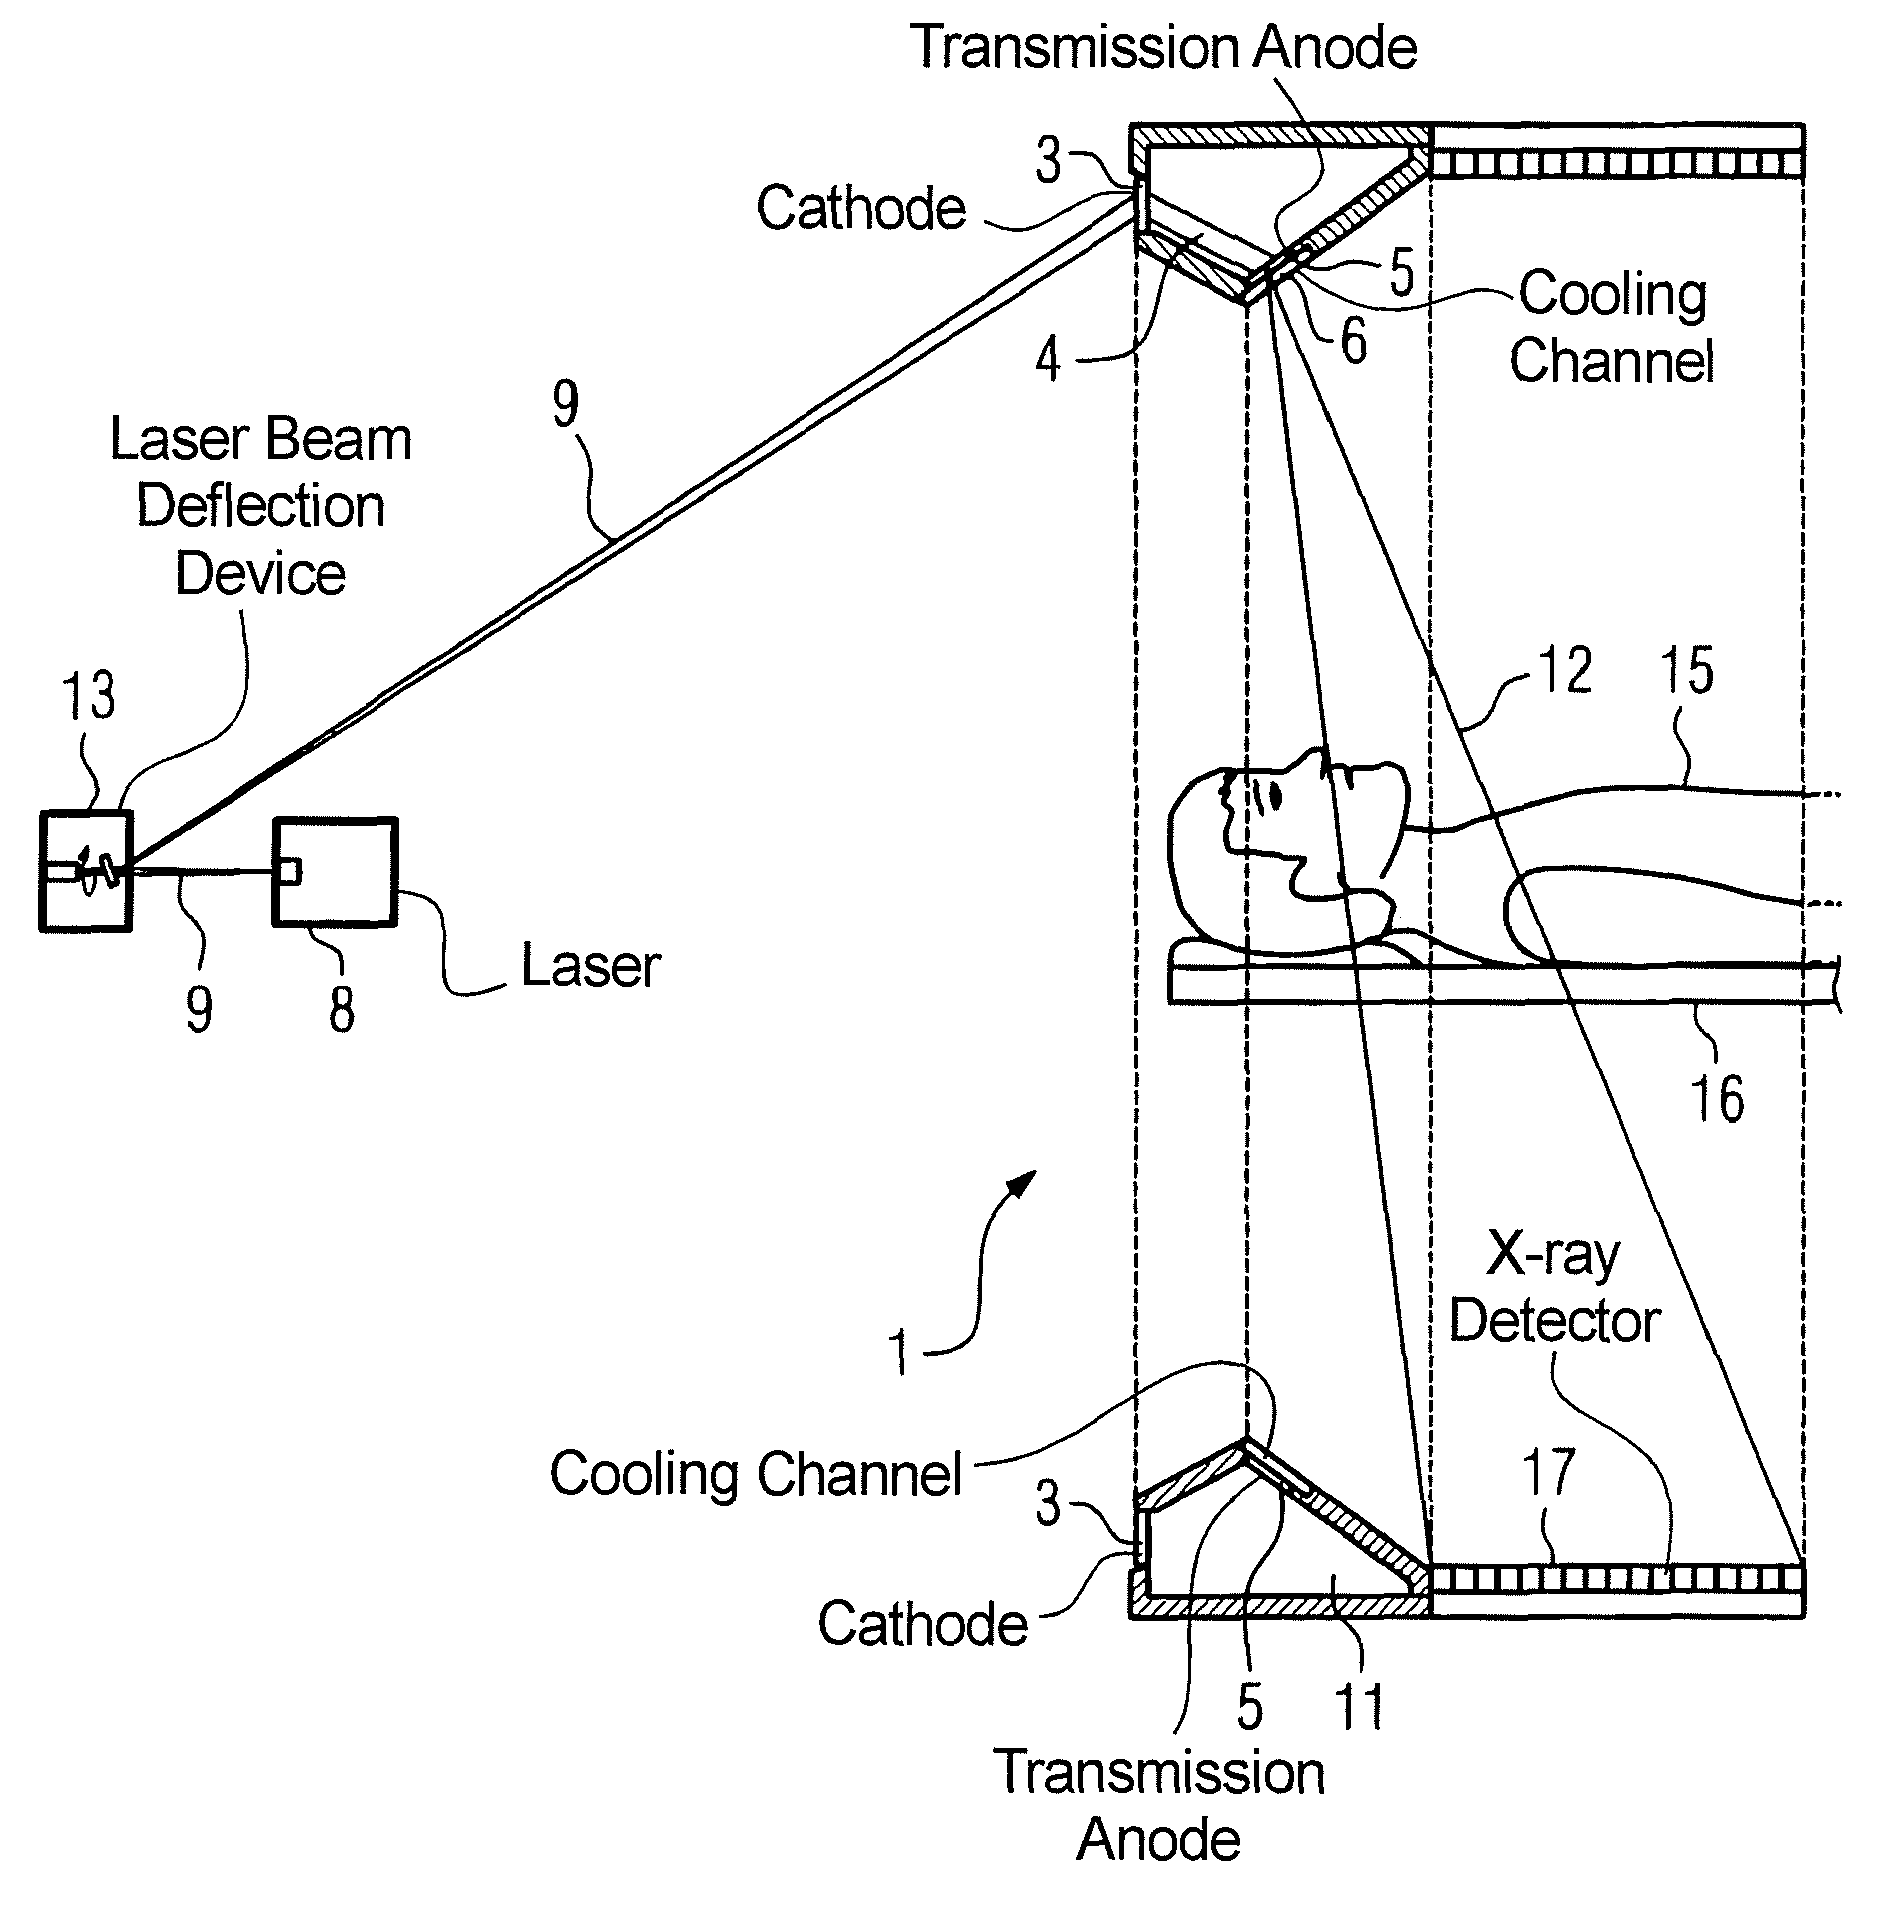 X-ray tube with transmission anode